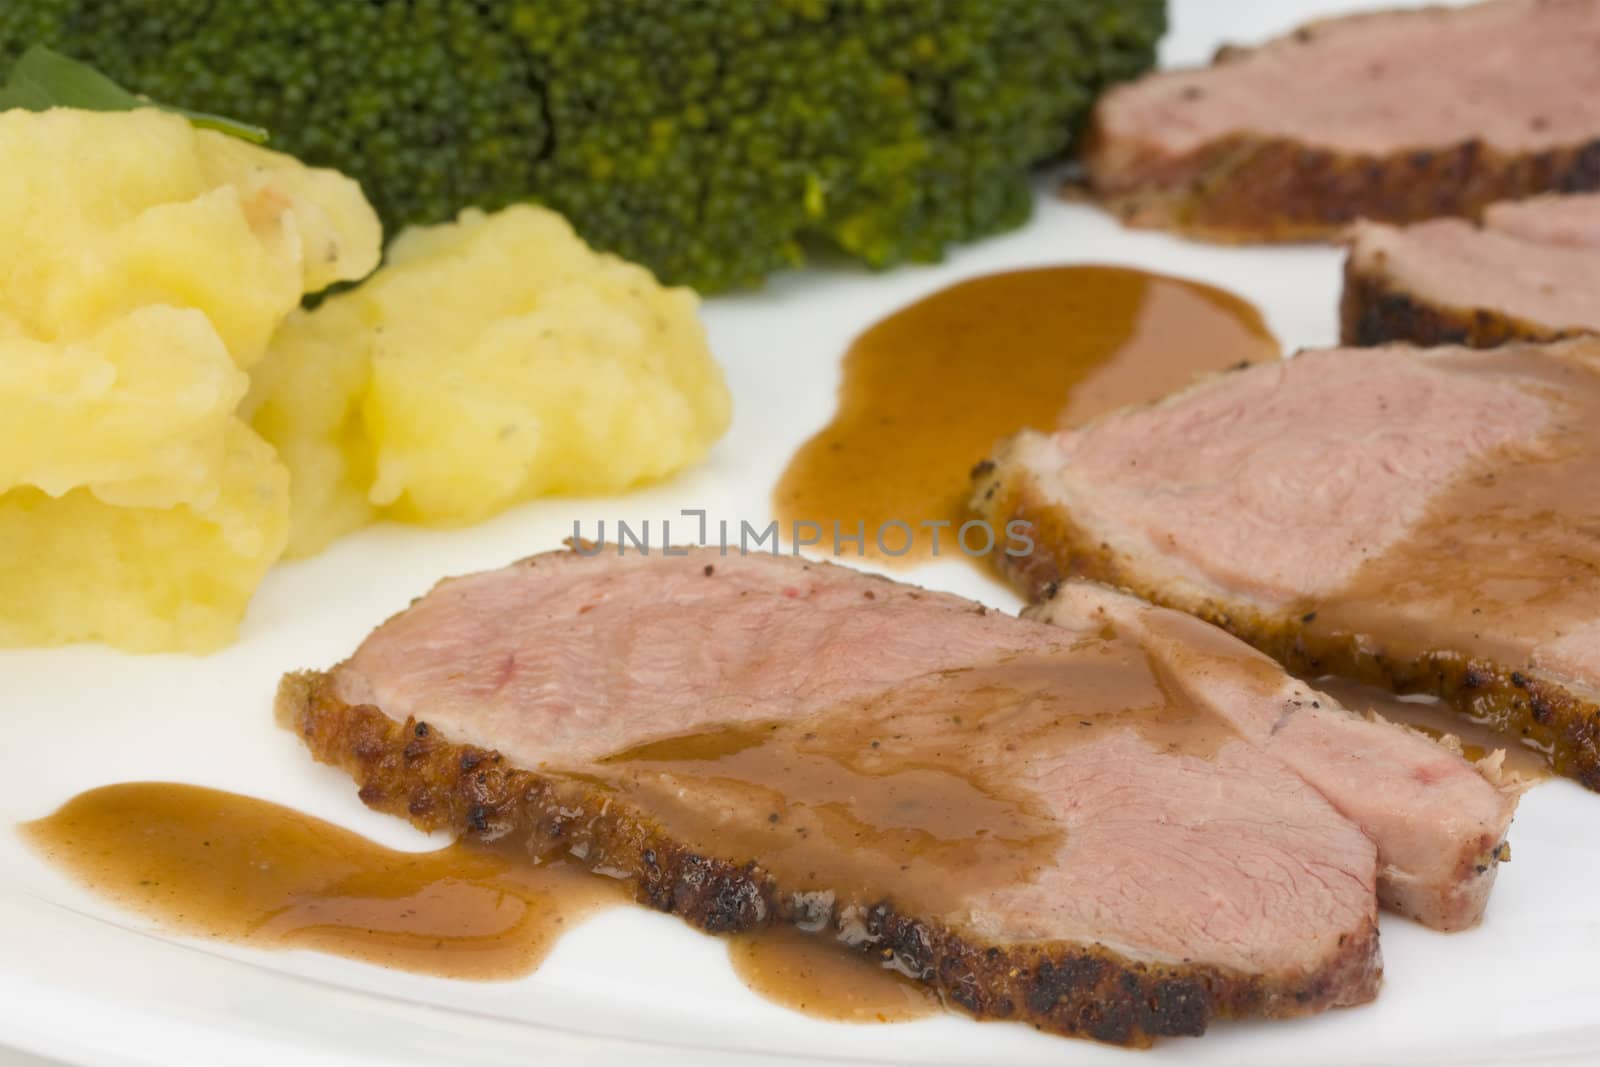 slices of a roasted duck fillet on a white plate